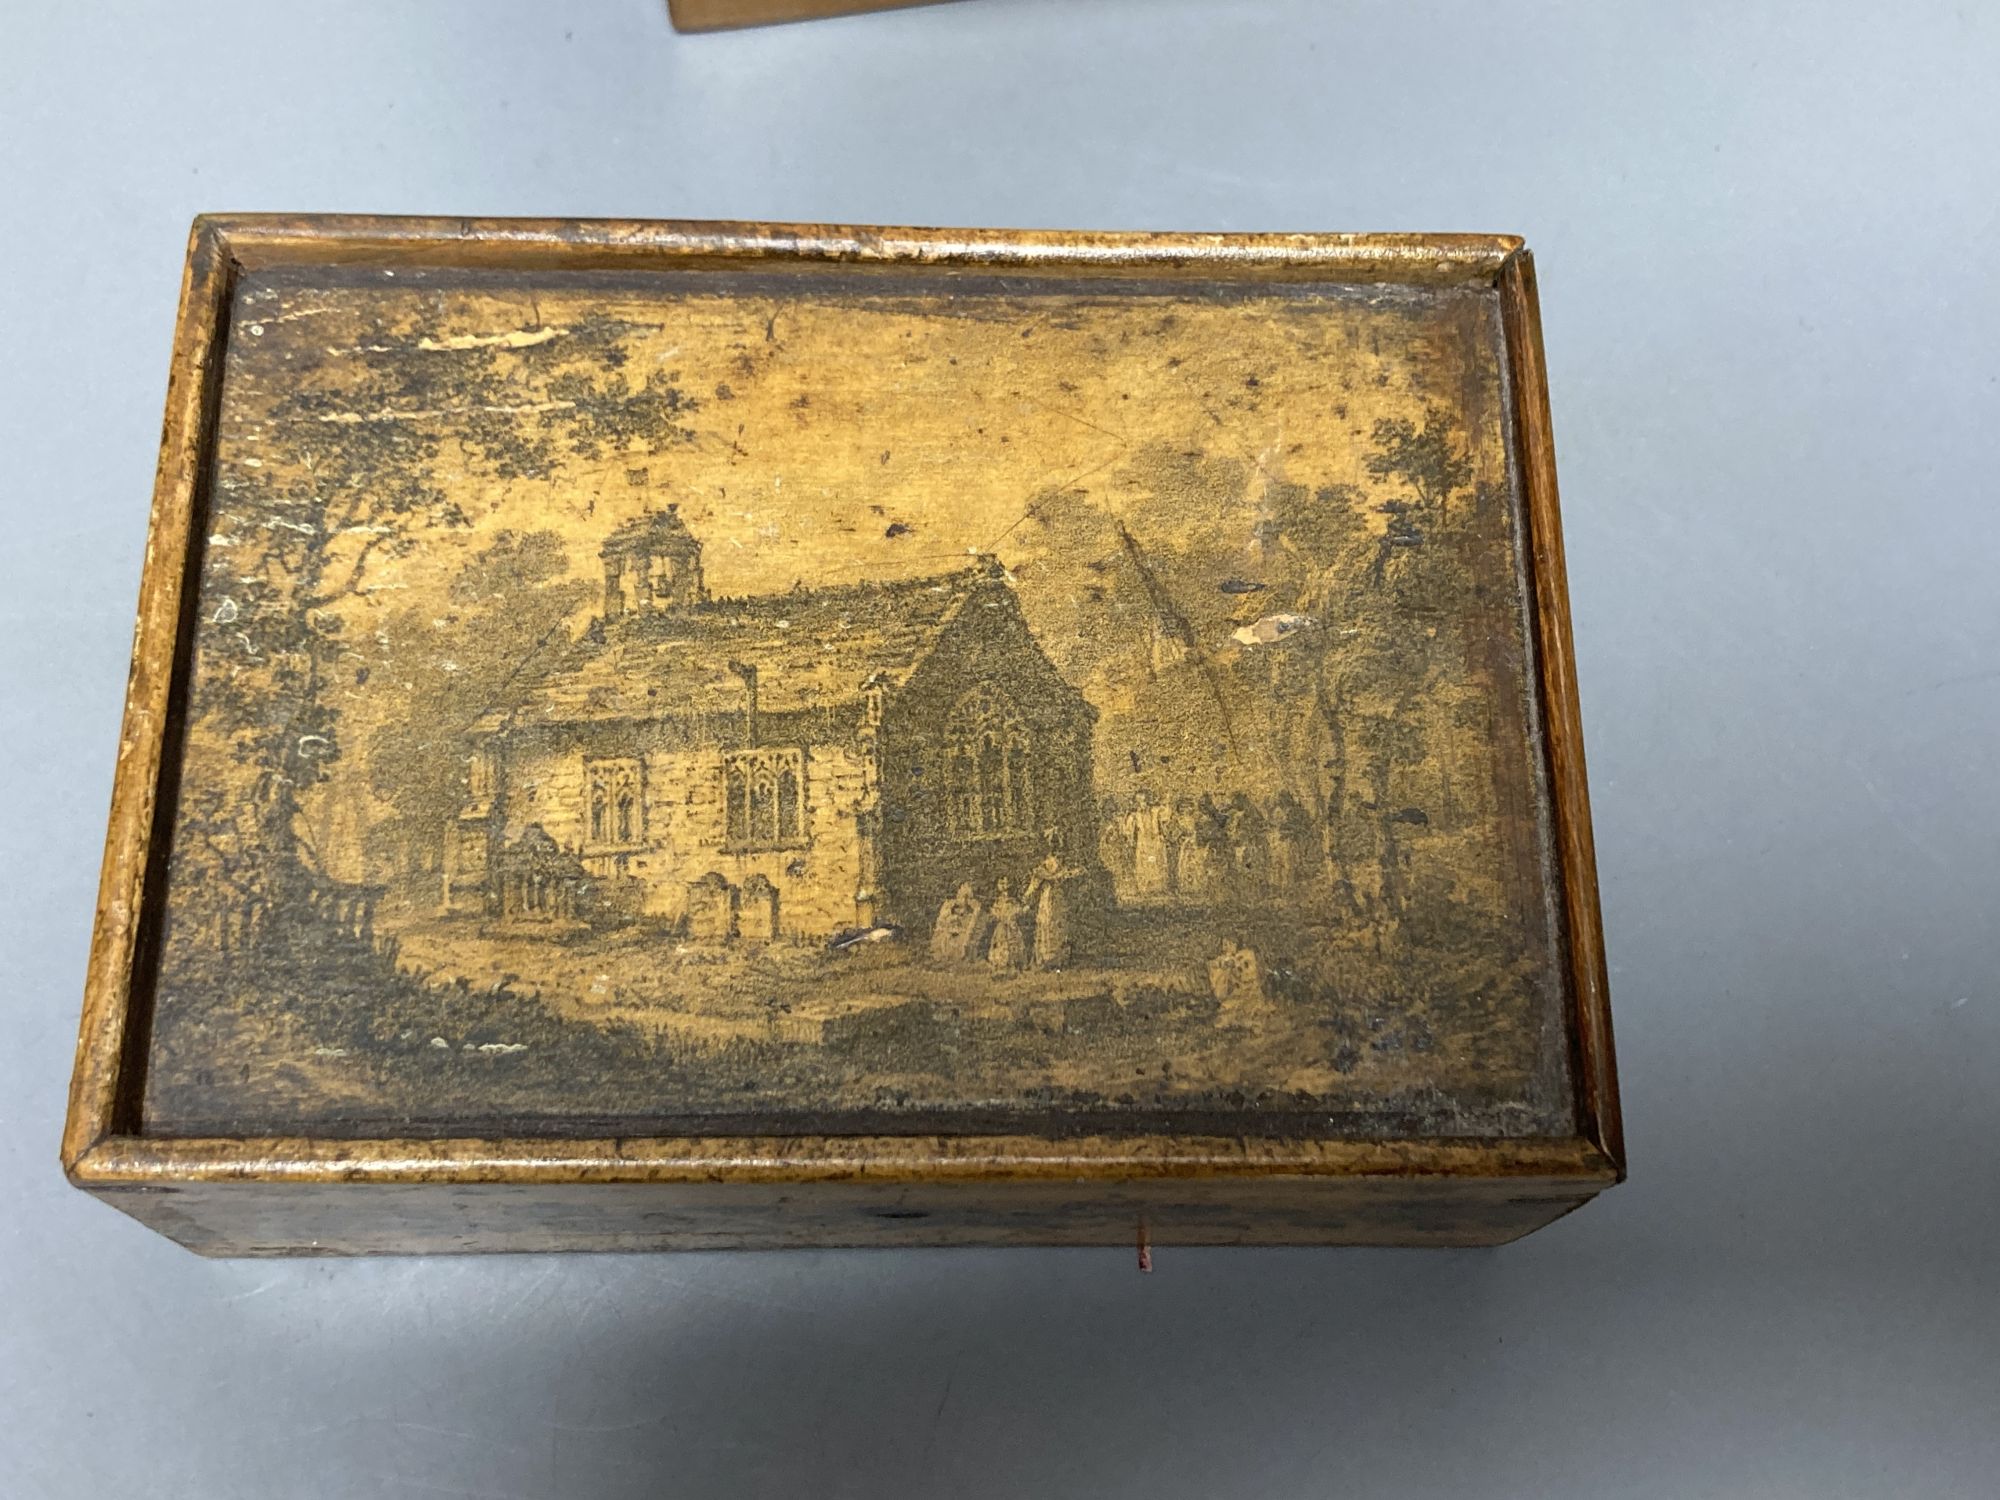 Two early Tunbridge ware sycamore boxes with views of Sussex? churches, early 19th century, 12.5 and 18cm